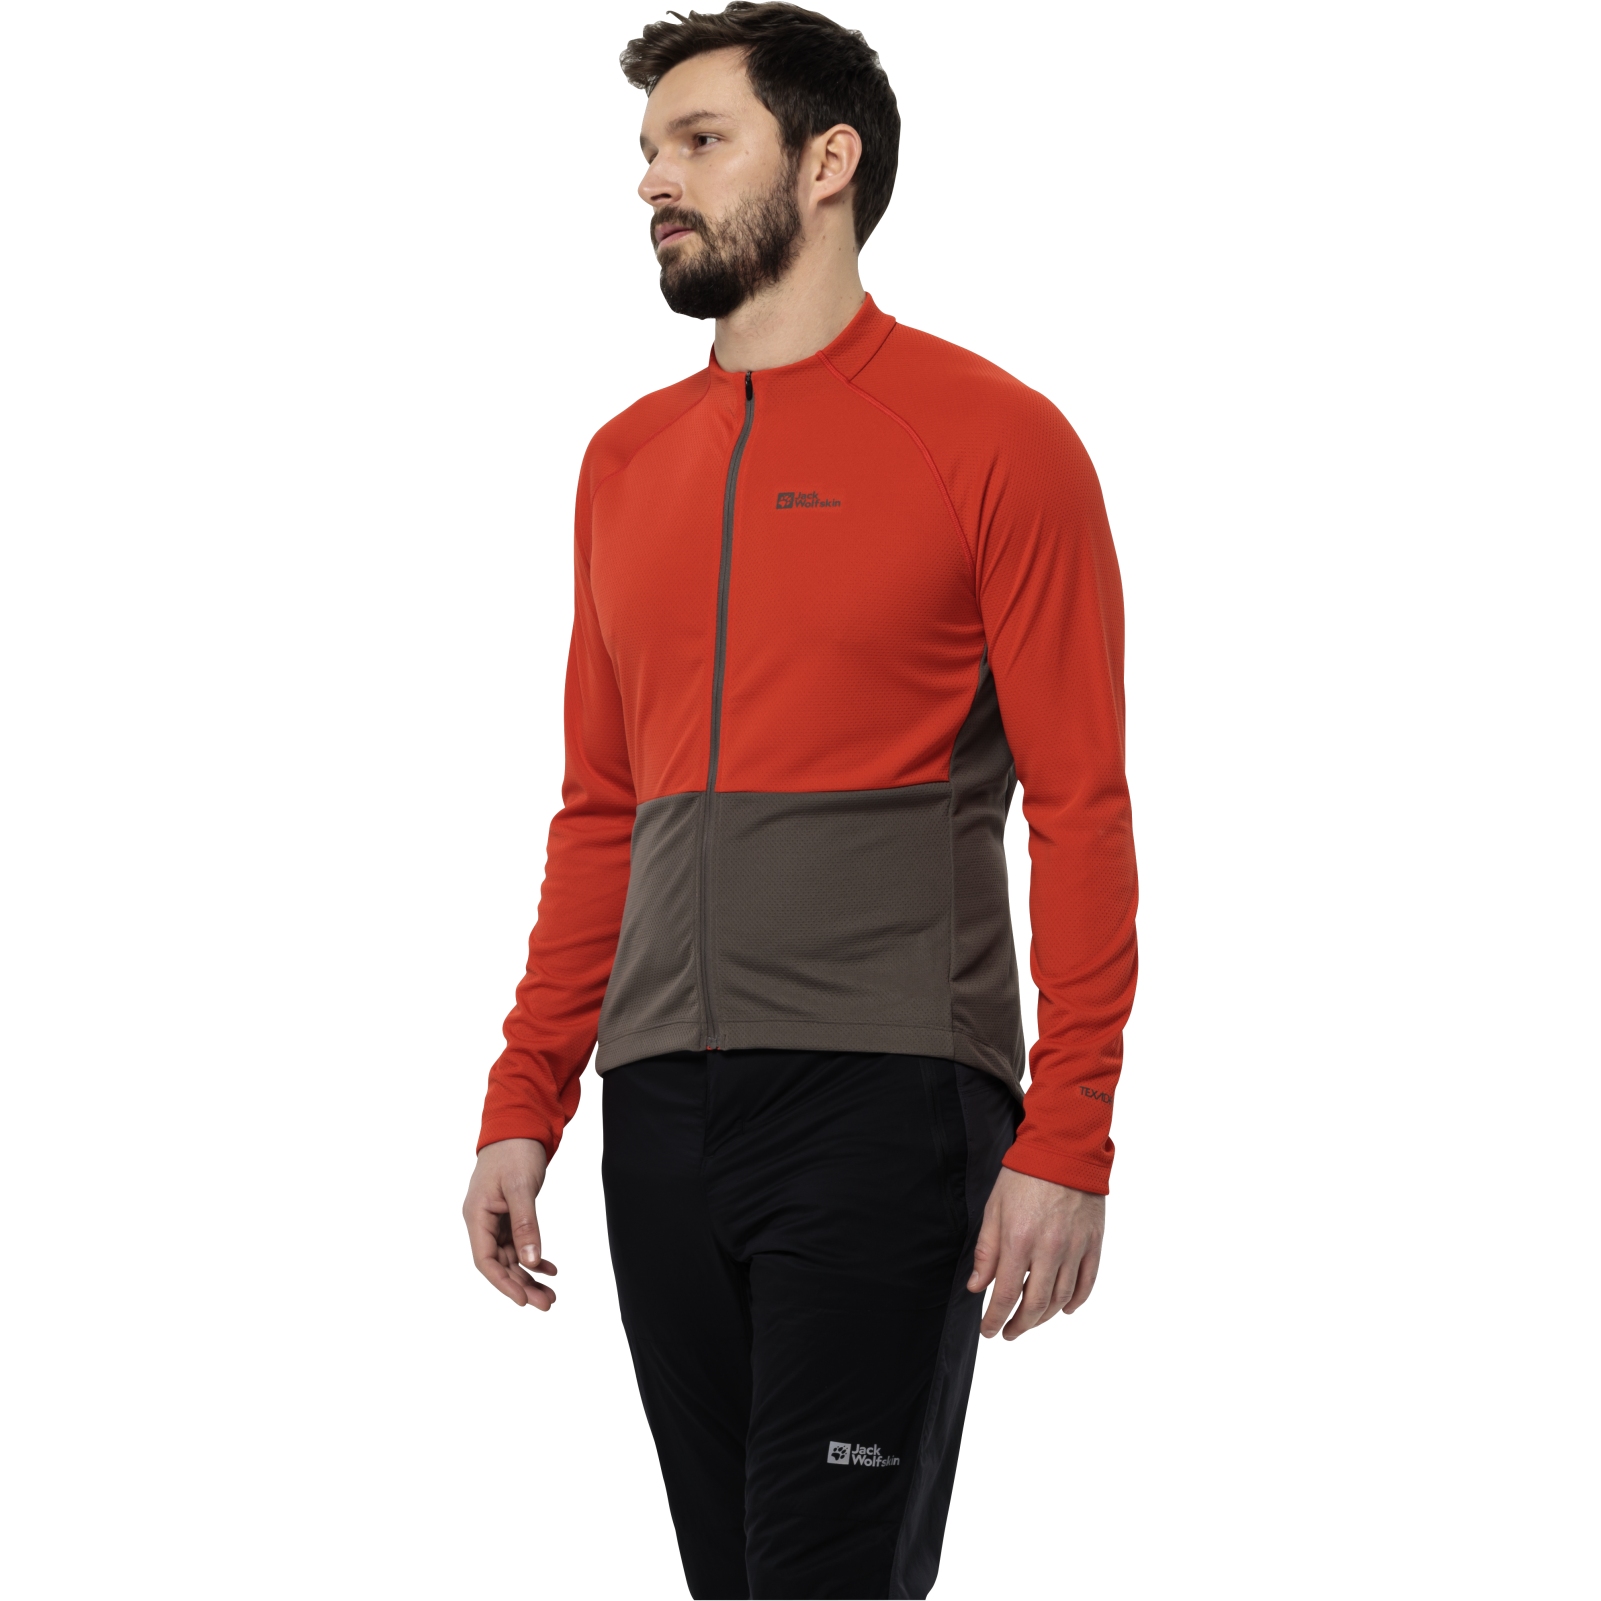 Picture of Jack Wolfskin Morobbia FZ L/S Longsleeve Jersey - strong red